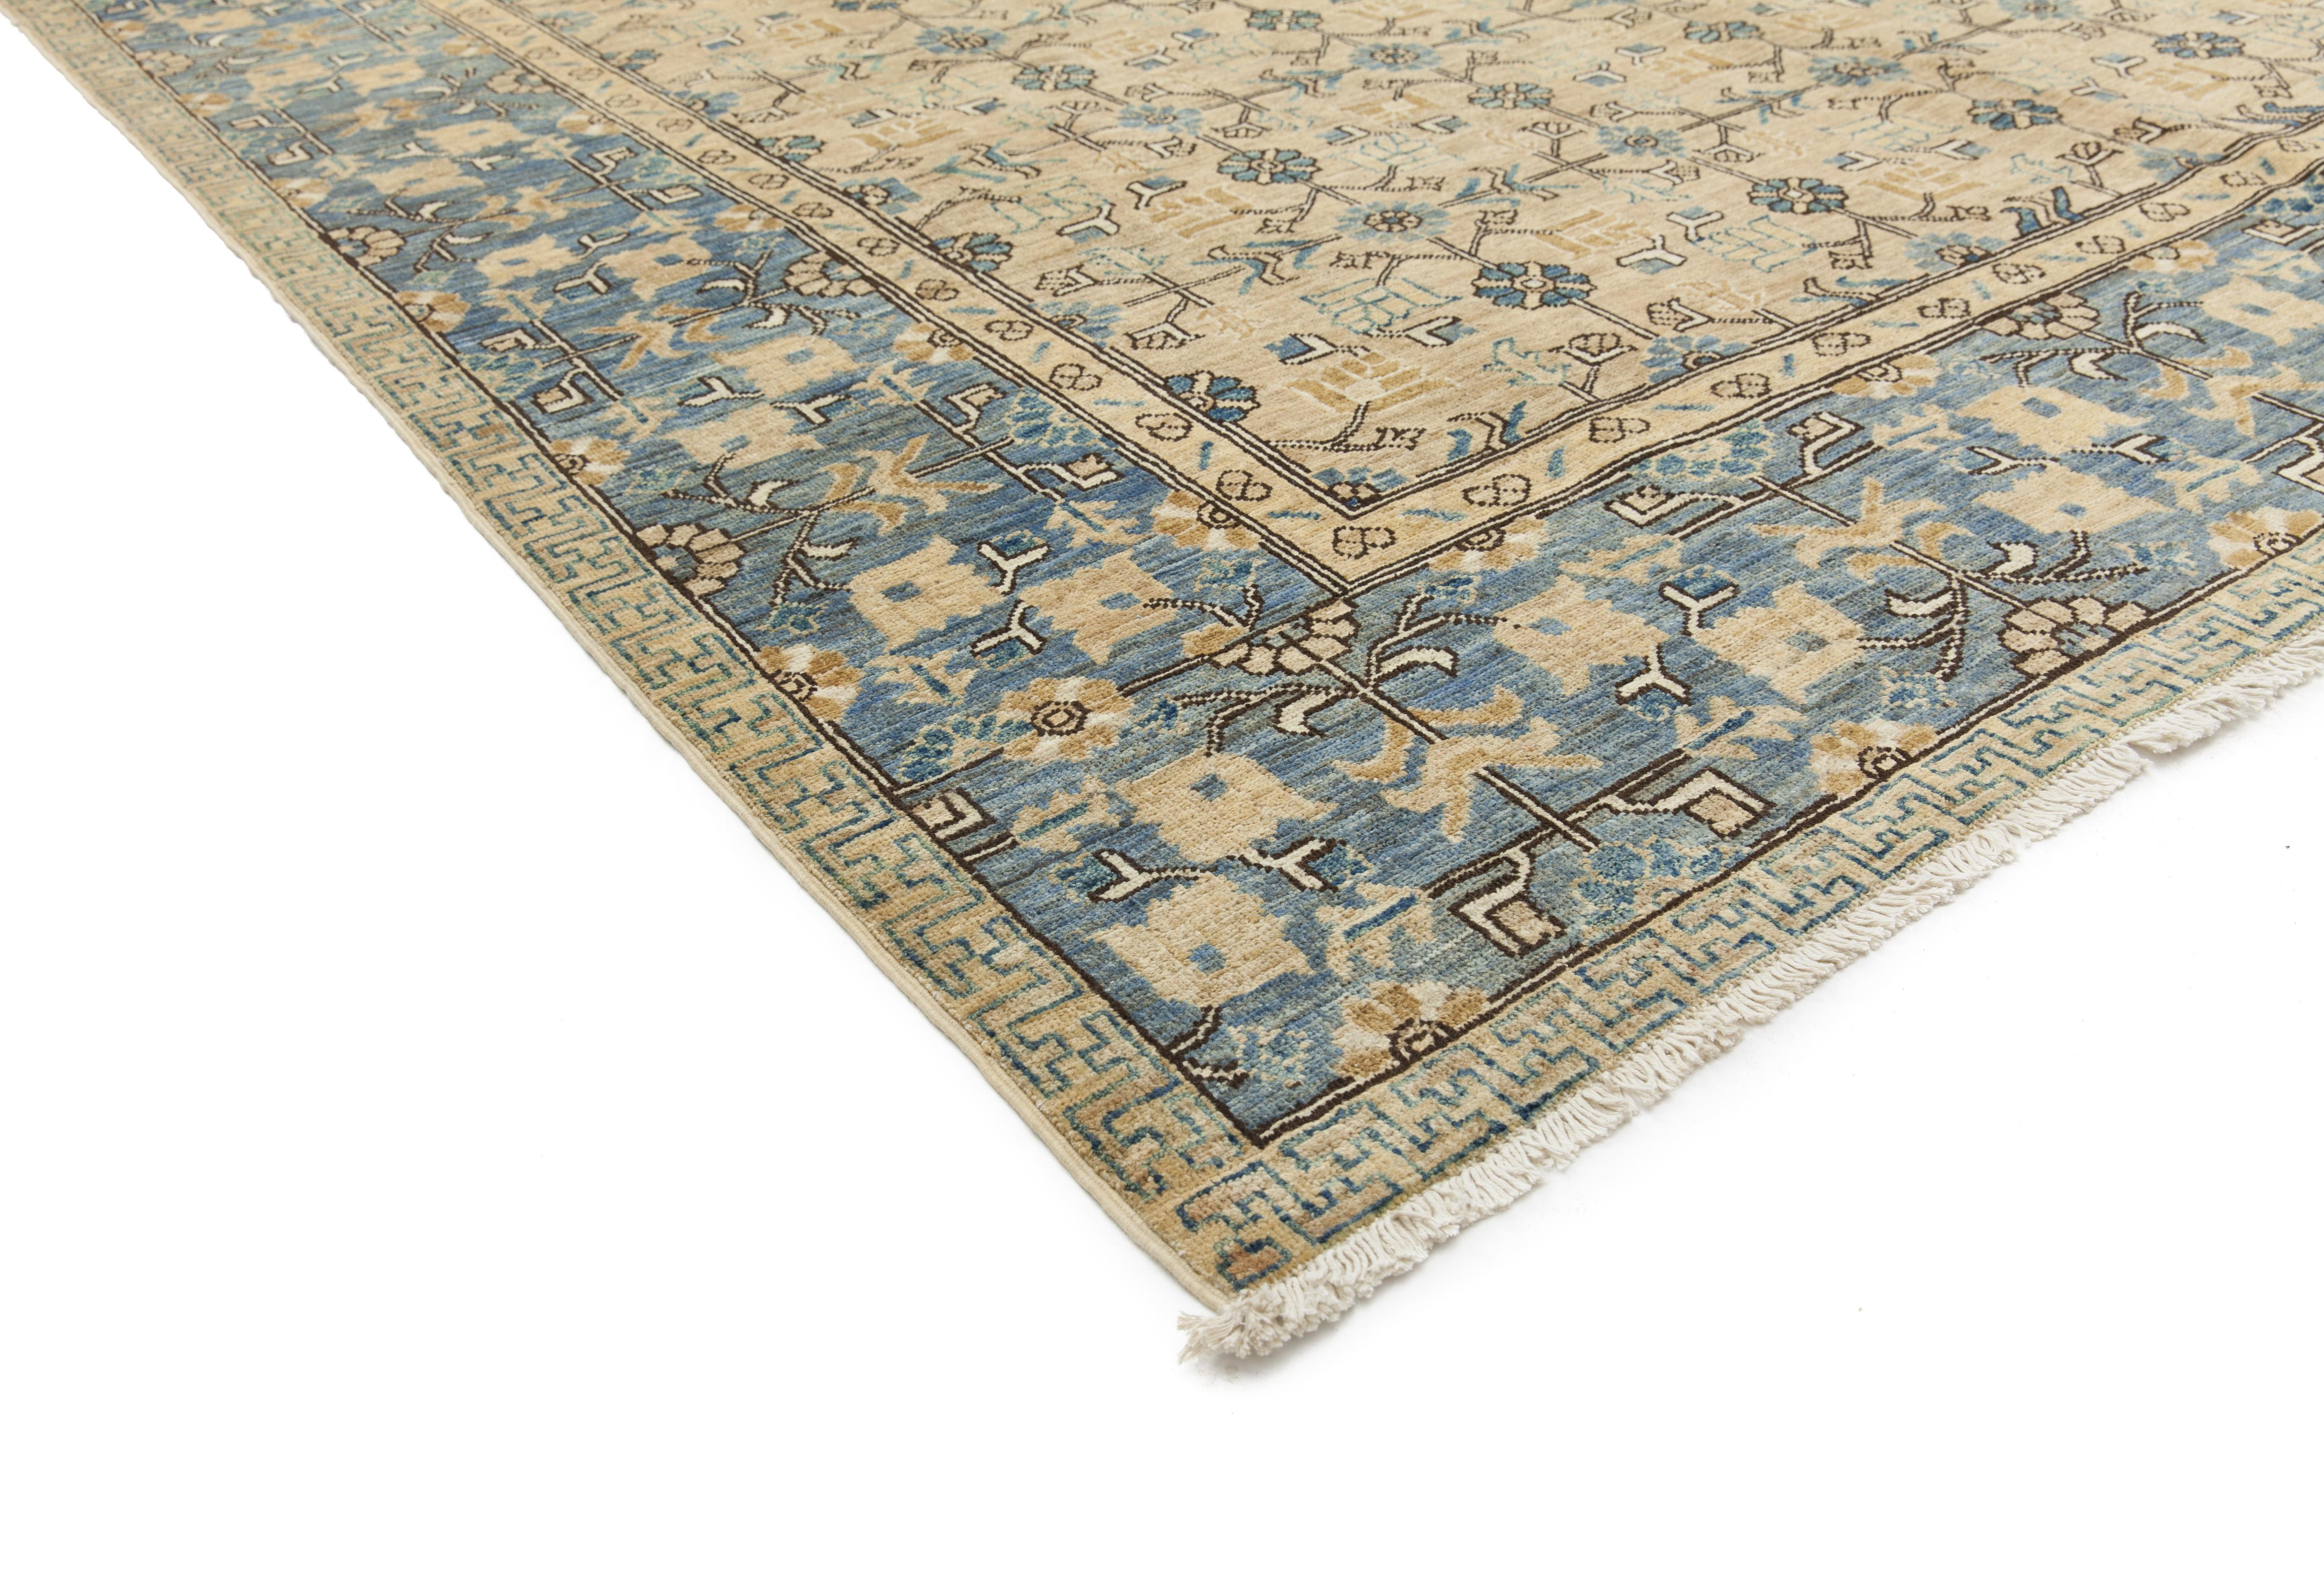 These rugs develop the decorative schemes of late 19th century Turkish carpets. These rugs have large simplified, mostly abstract patterns in light tonalities featuring ivory, pale blue, rust, salmon and light green. The origin of these patterns